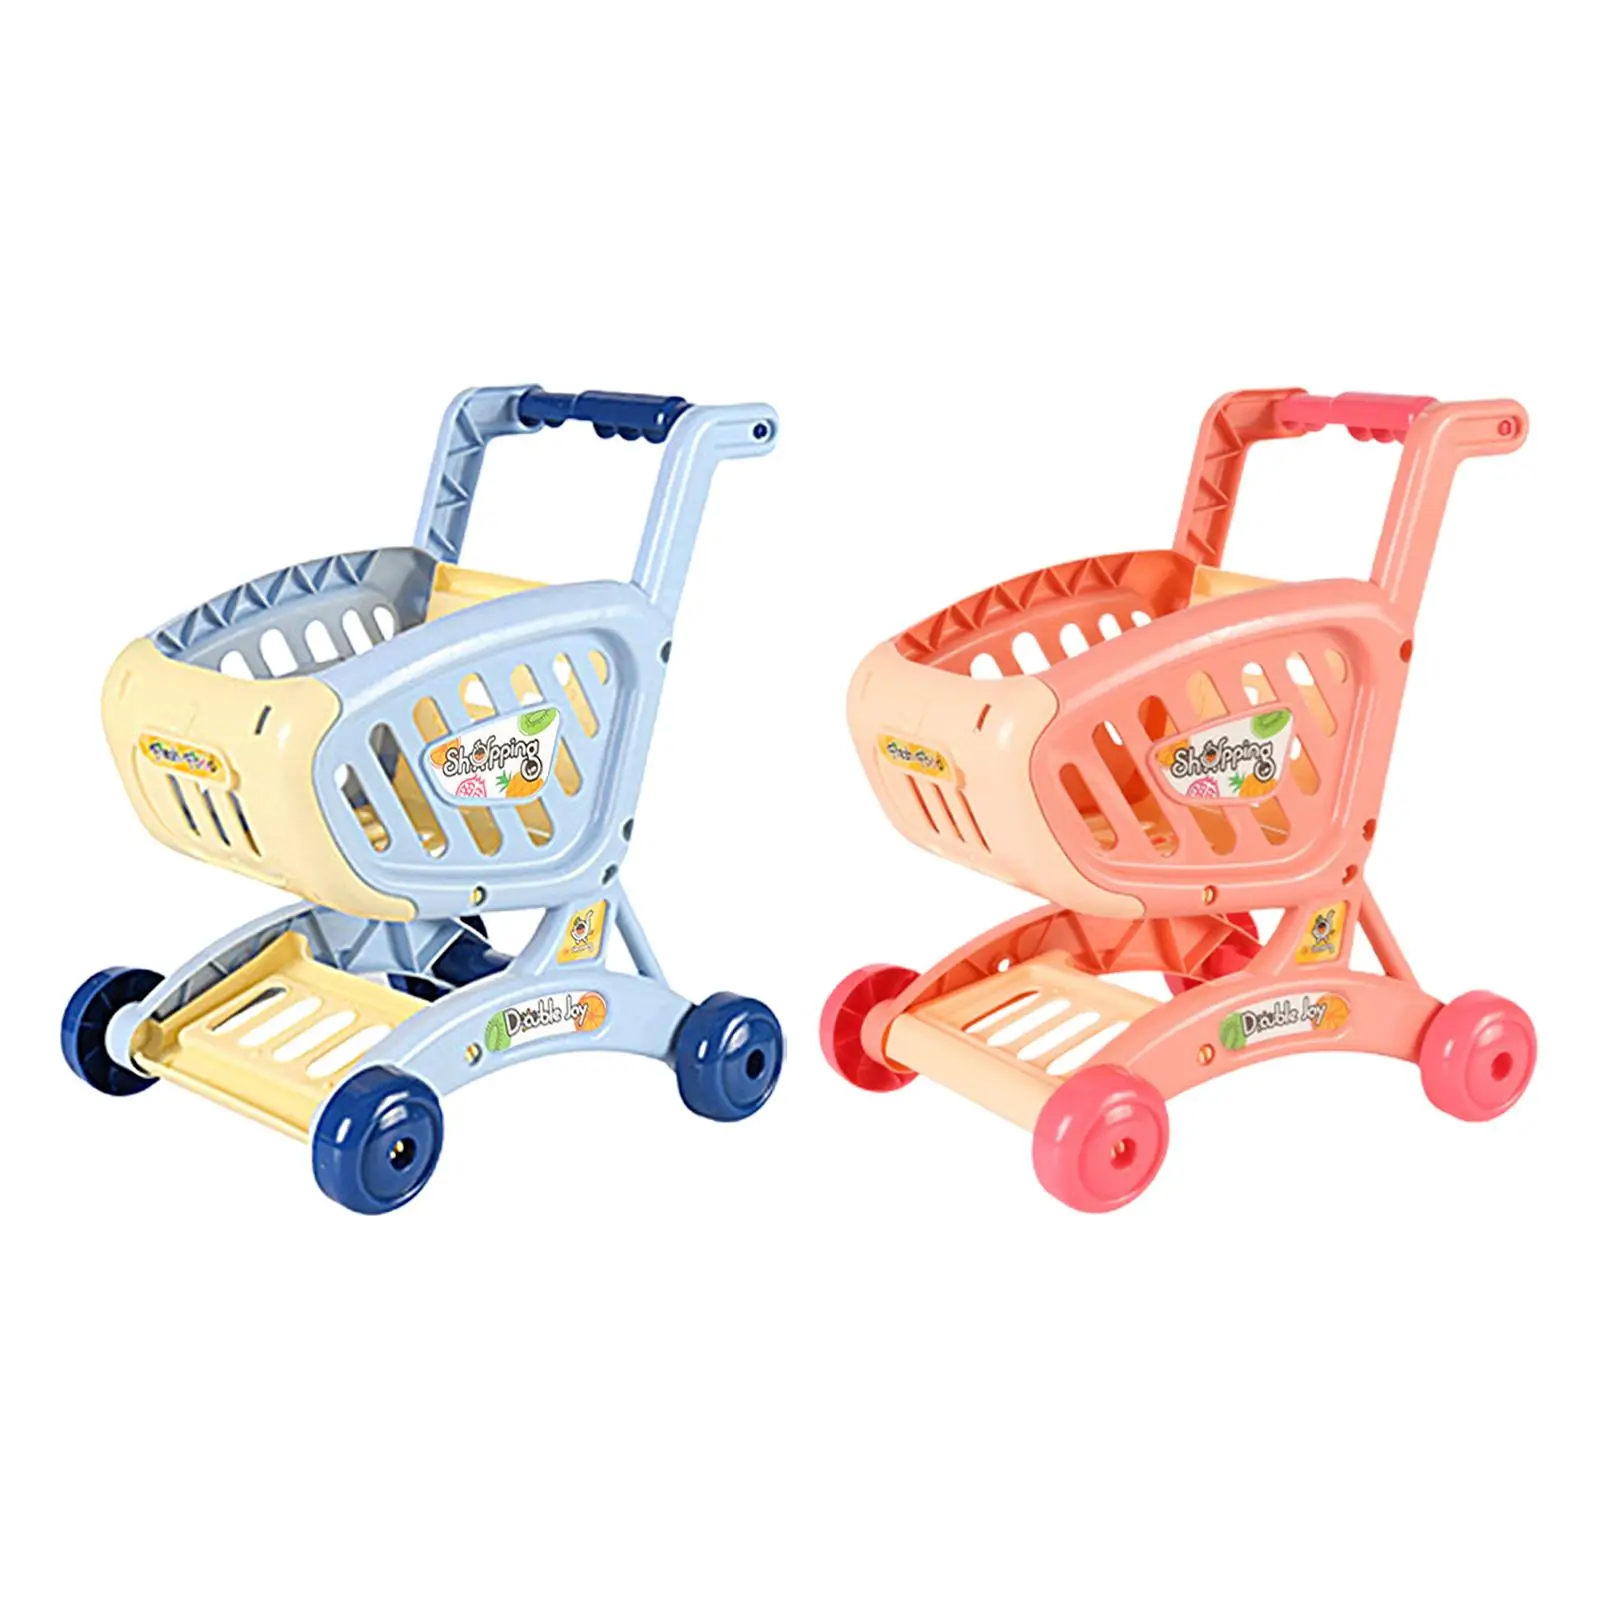 

Shopping Cart Creative Toys Early Educational Toys Shopping Trolley Toy for Toddlers Baby Girls and Boys Ages 3 and up Kids